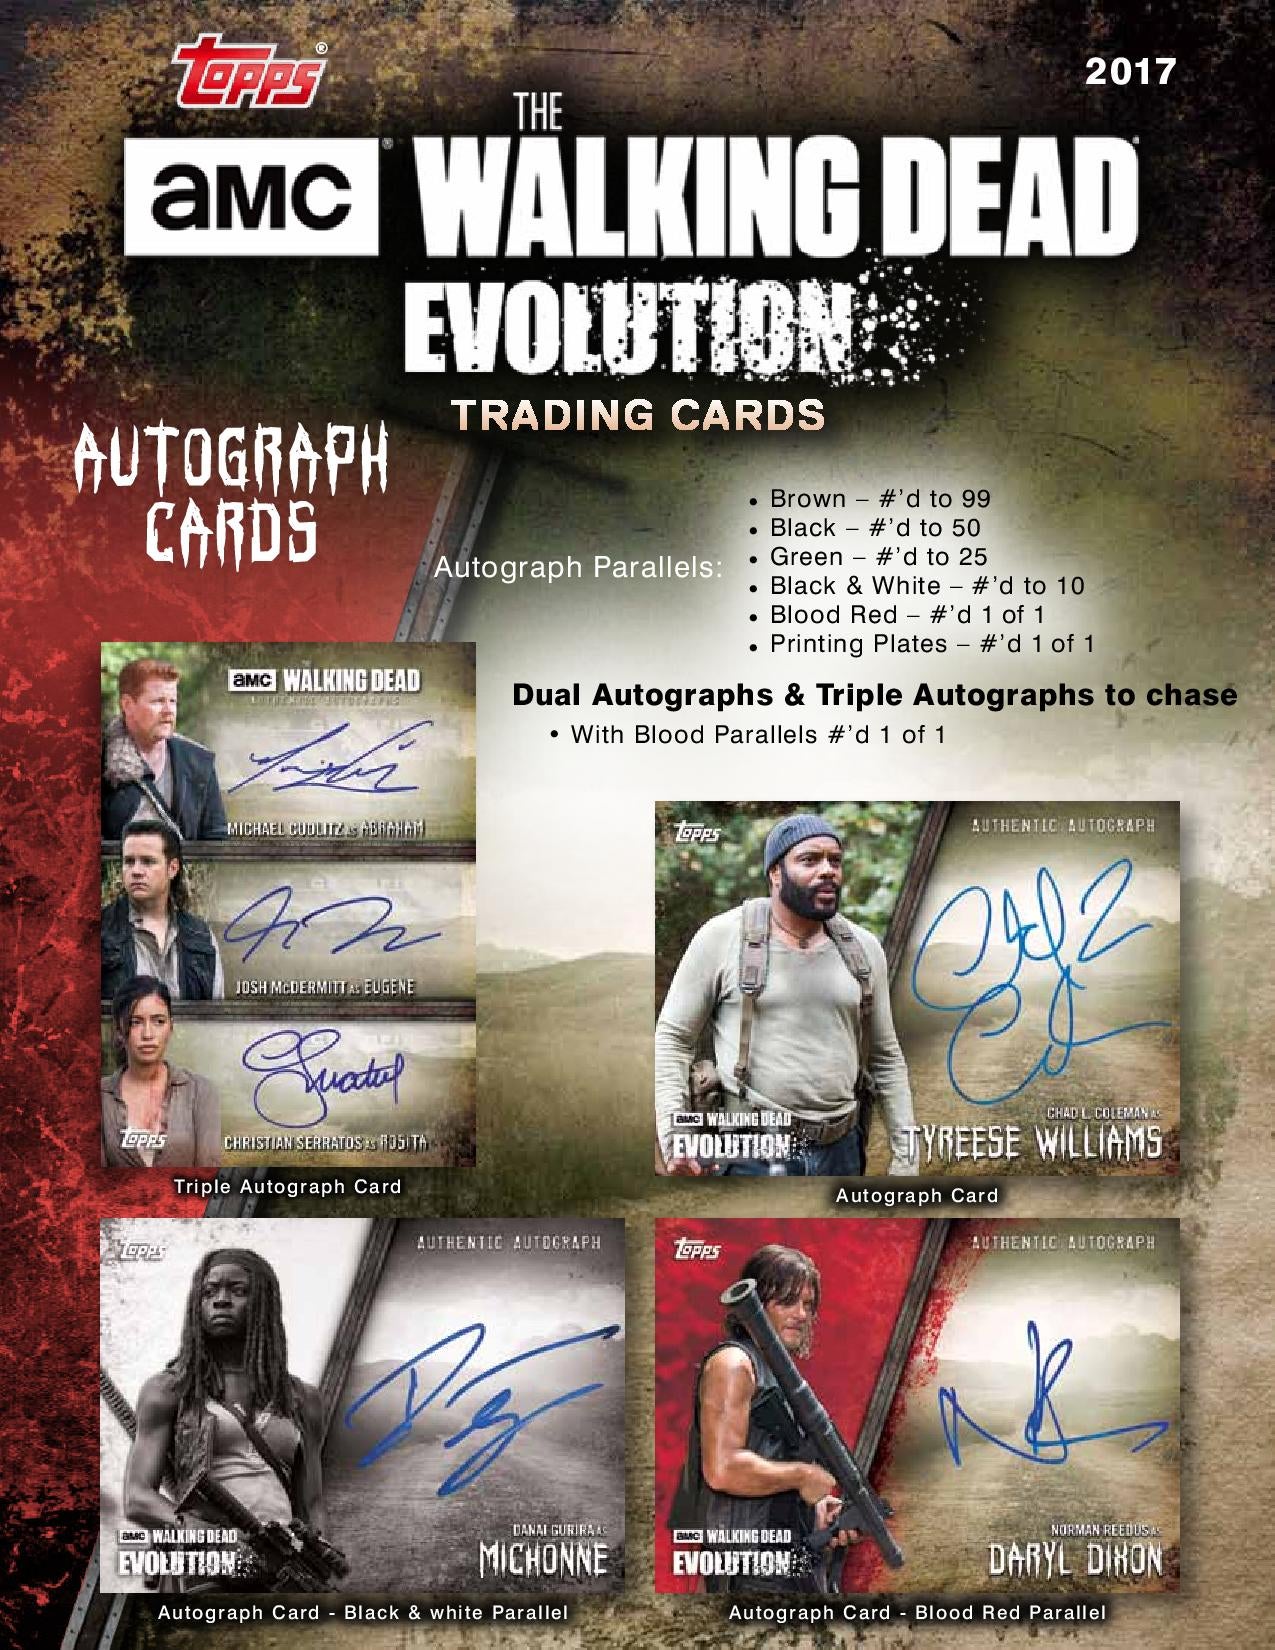 ALL 10 CARDS THE WALKING DEAD EVOLUTION CHASE CARD SET WALKERS 